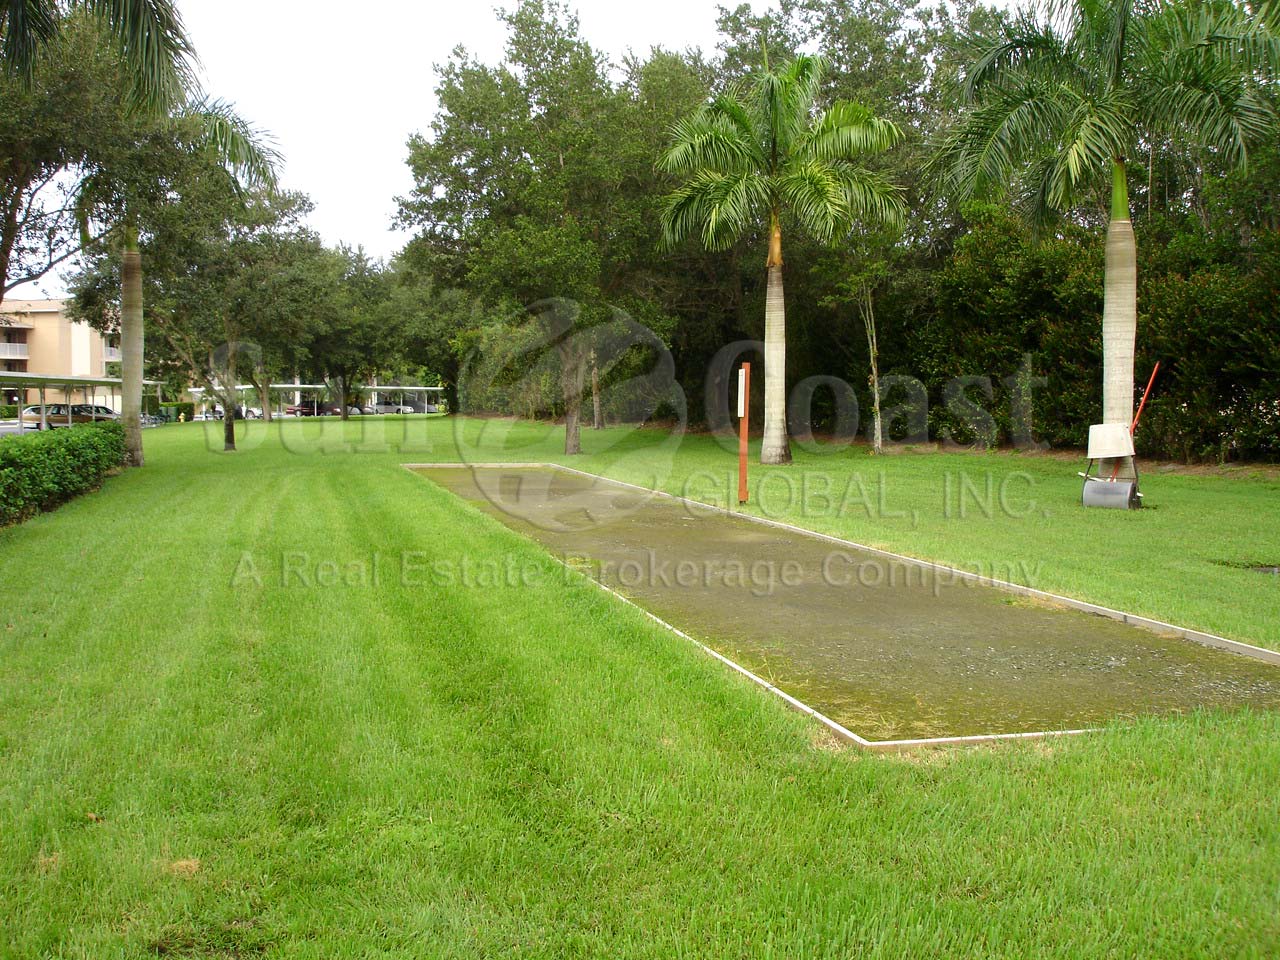 Country Glen Bocce Ball Courts